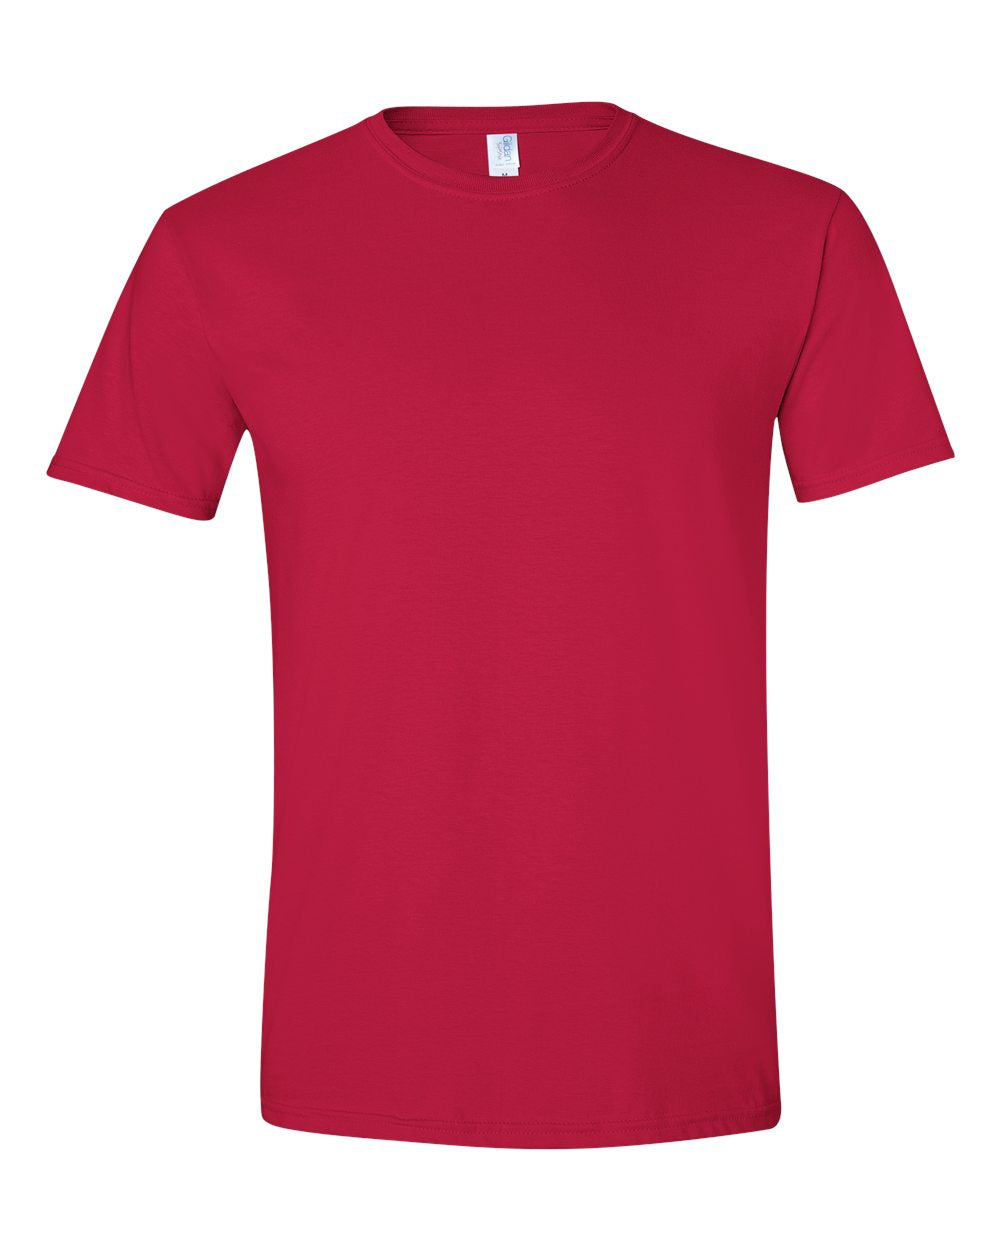 Gildan Softstyle Tee (64000) in Cherry Red